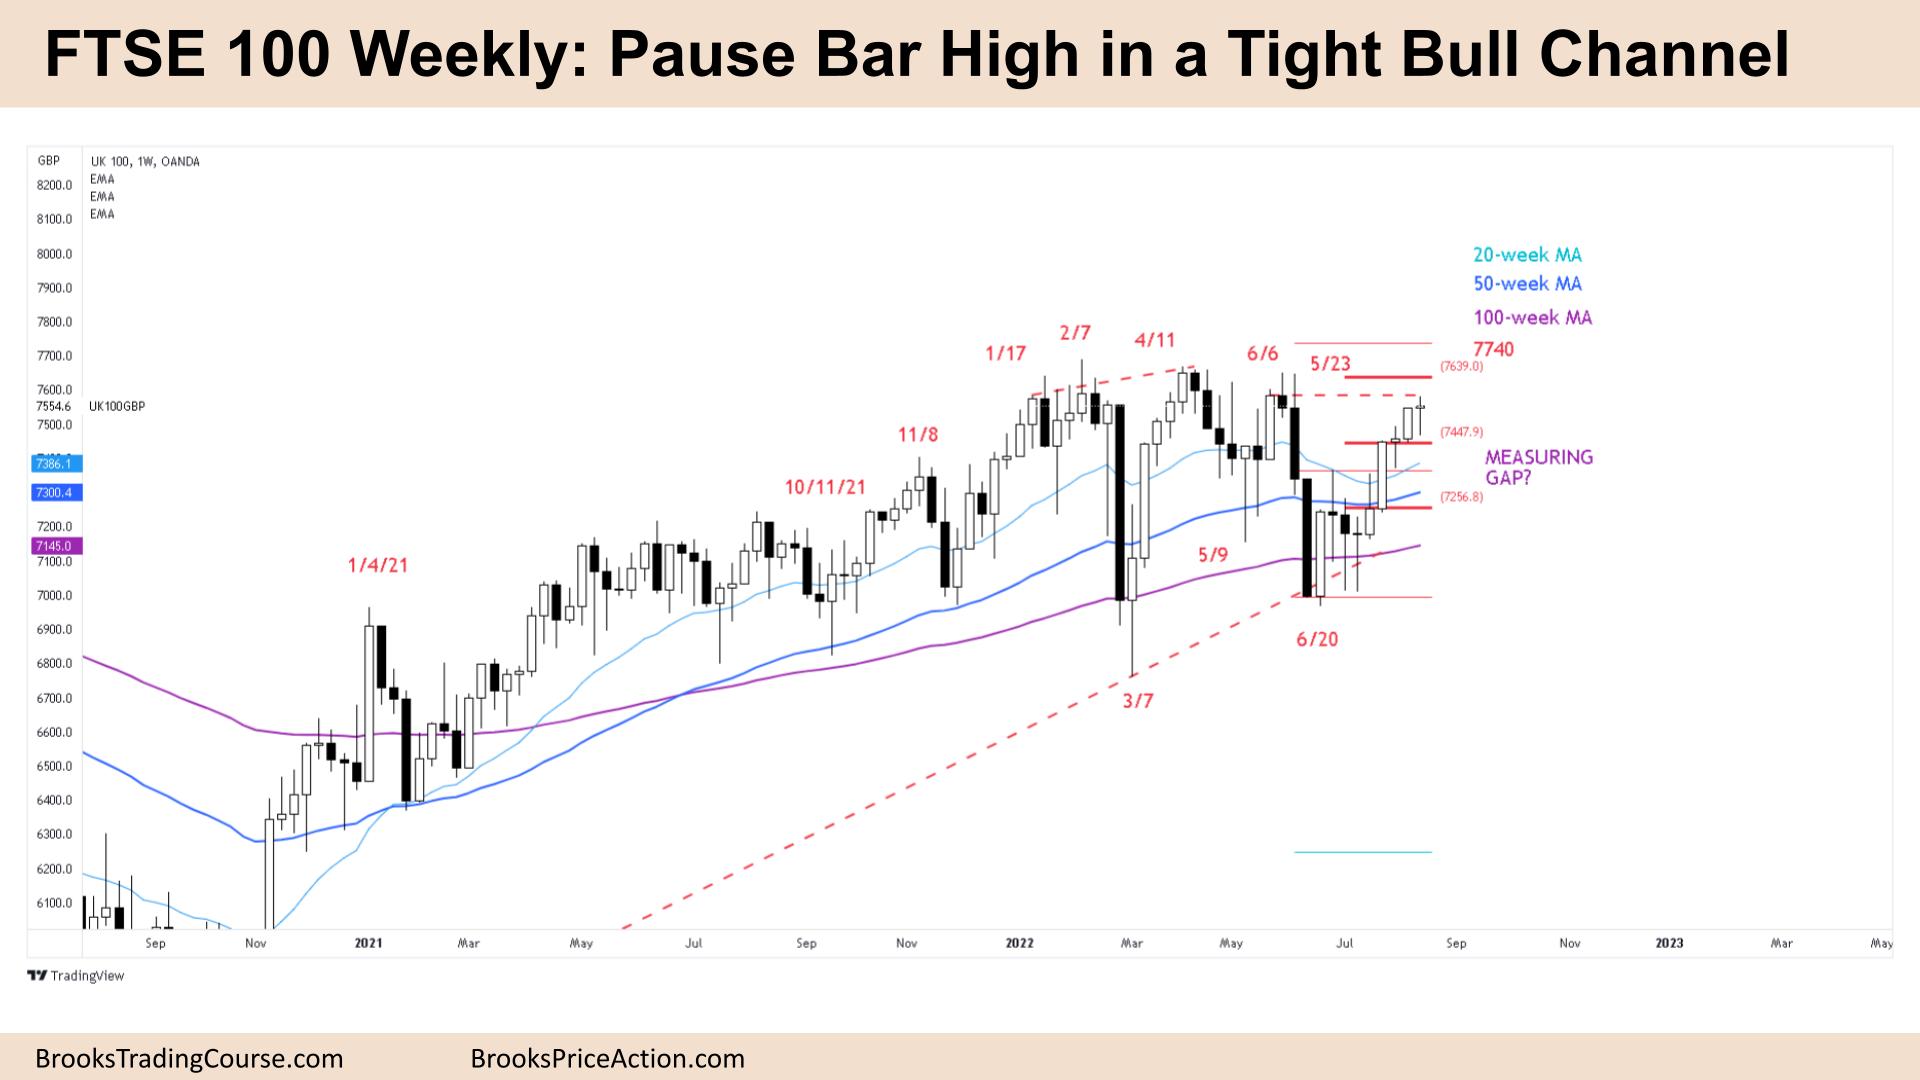 FTSE 100 Pause Bar High in a Tight Bull Channel